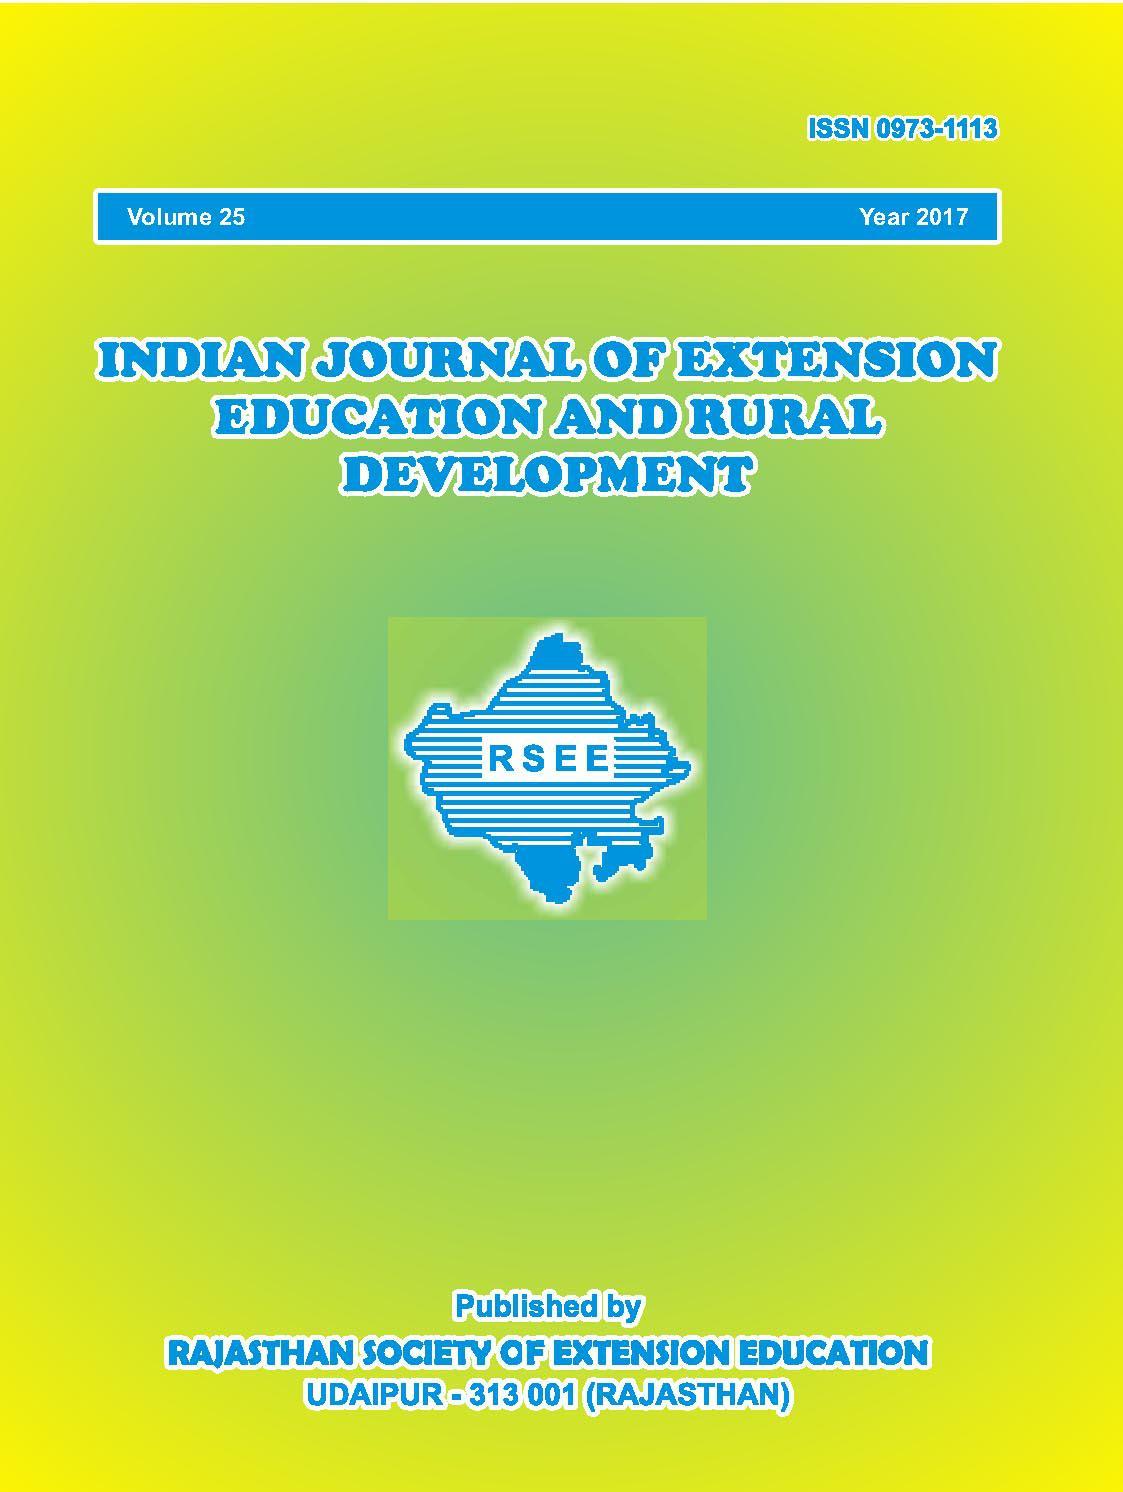 INDIAN JOURNAL OF EXTENSION EDUCATION AND RURAL DEVELOPMENT 2017